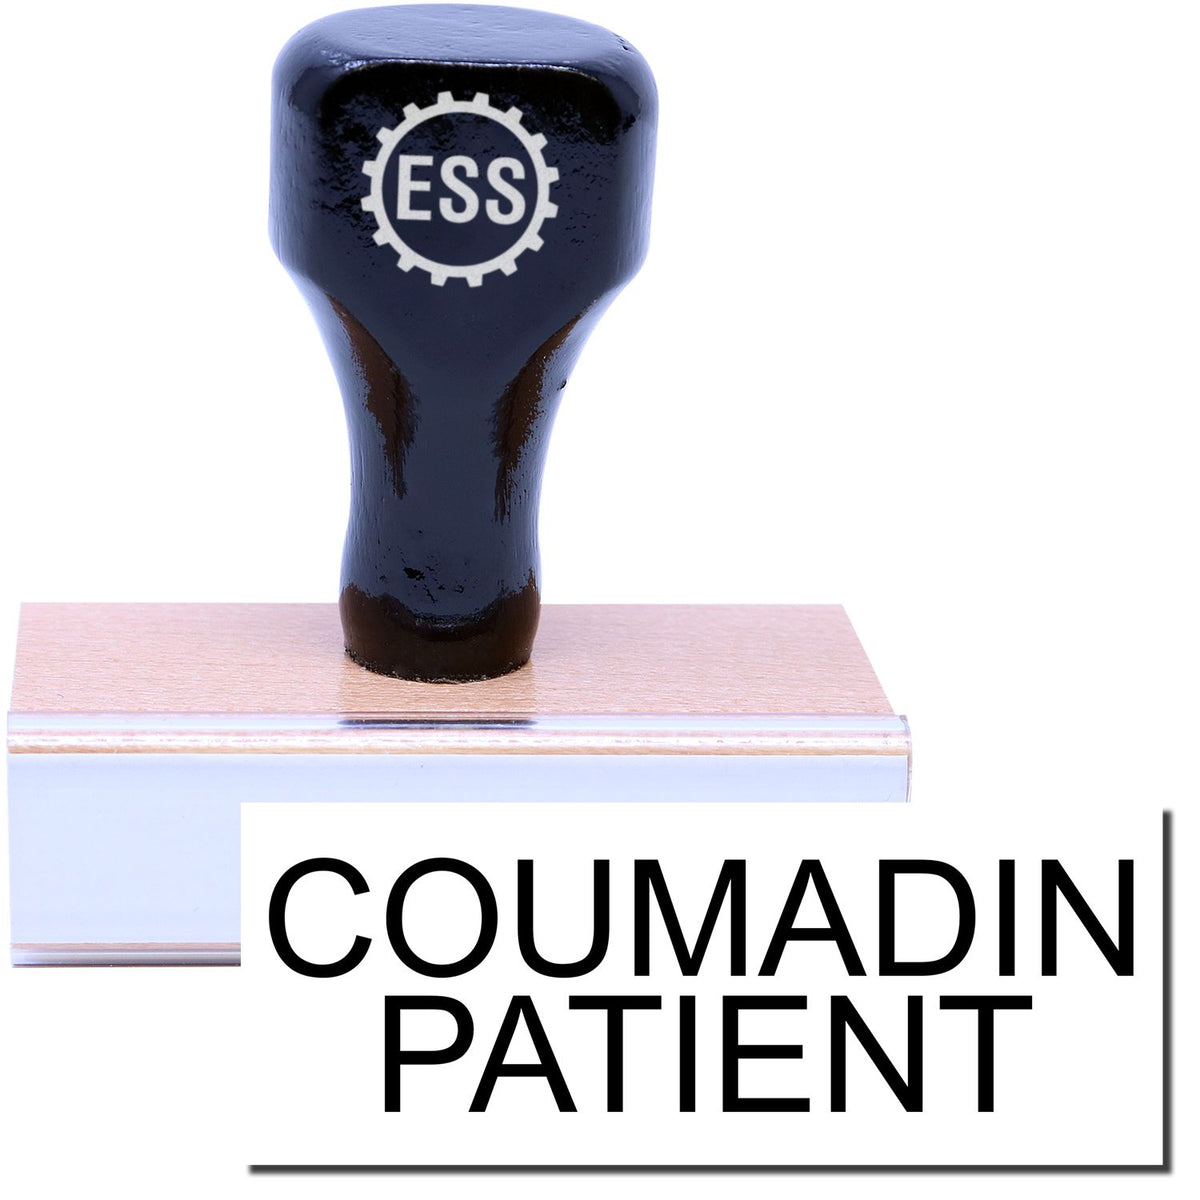 A stock office rubber stamp with a stamped image showing how the text &quot;COUMADIN PATIENT&quot; is displayed after stamping.